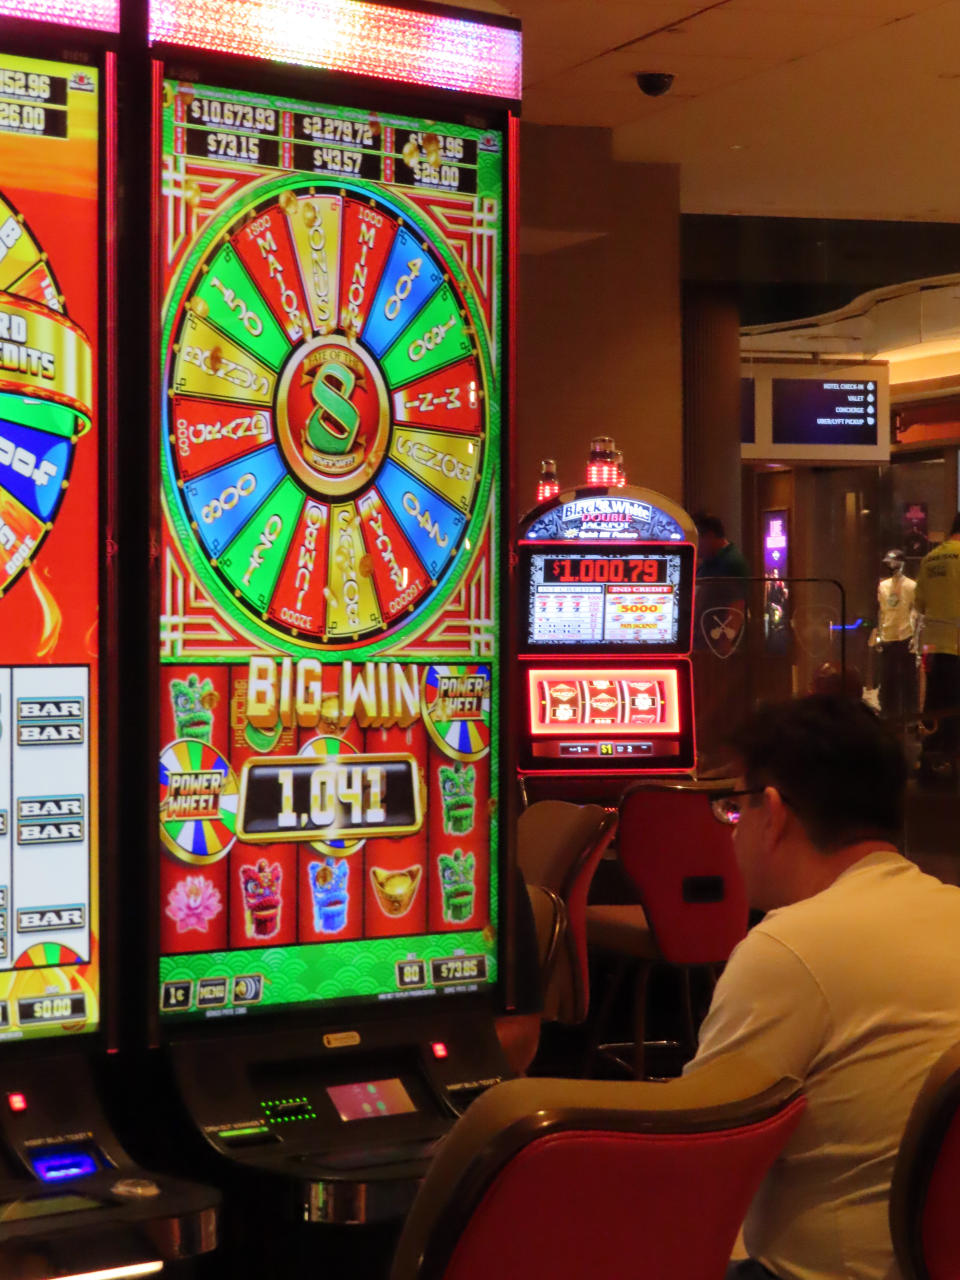 A gambler rings up a win on a slot machine at the Hard Rock casino in Atlantic City, N.J., Aug. 8, 2022. On Oct. 17, 2022, New Jersey gambling regulators reported Atlantic City's casinos won nearly $252 million from in-person gamblers in September, putting them on track to exceed pre-pandemic levels of revenue by the end of the year. (AP Photo/Wayne Parry)